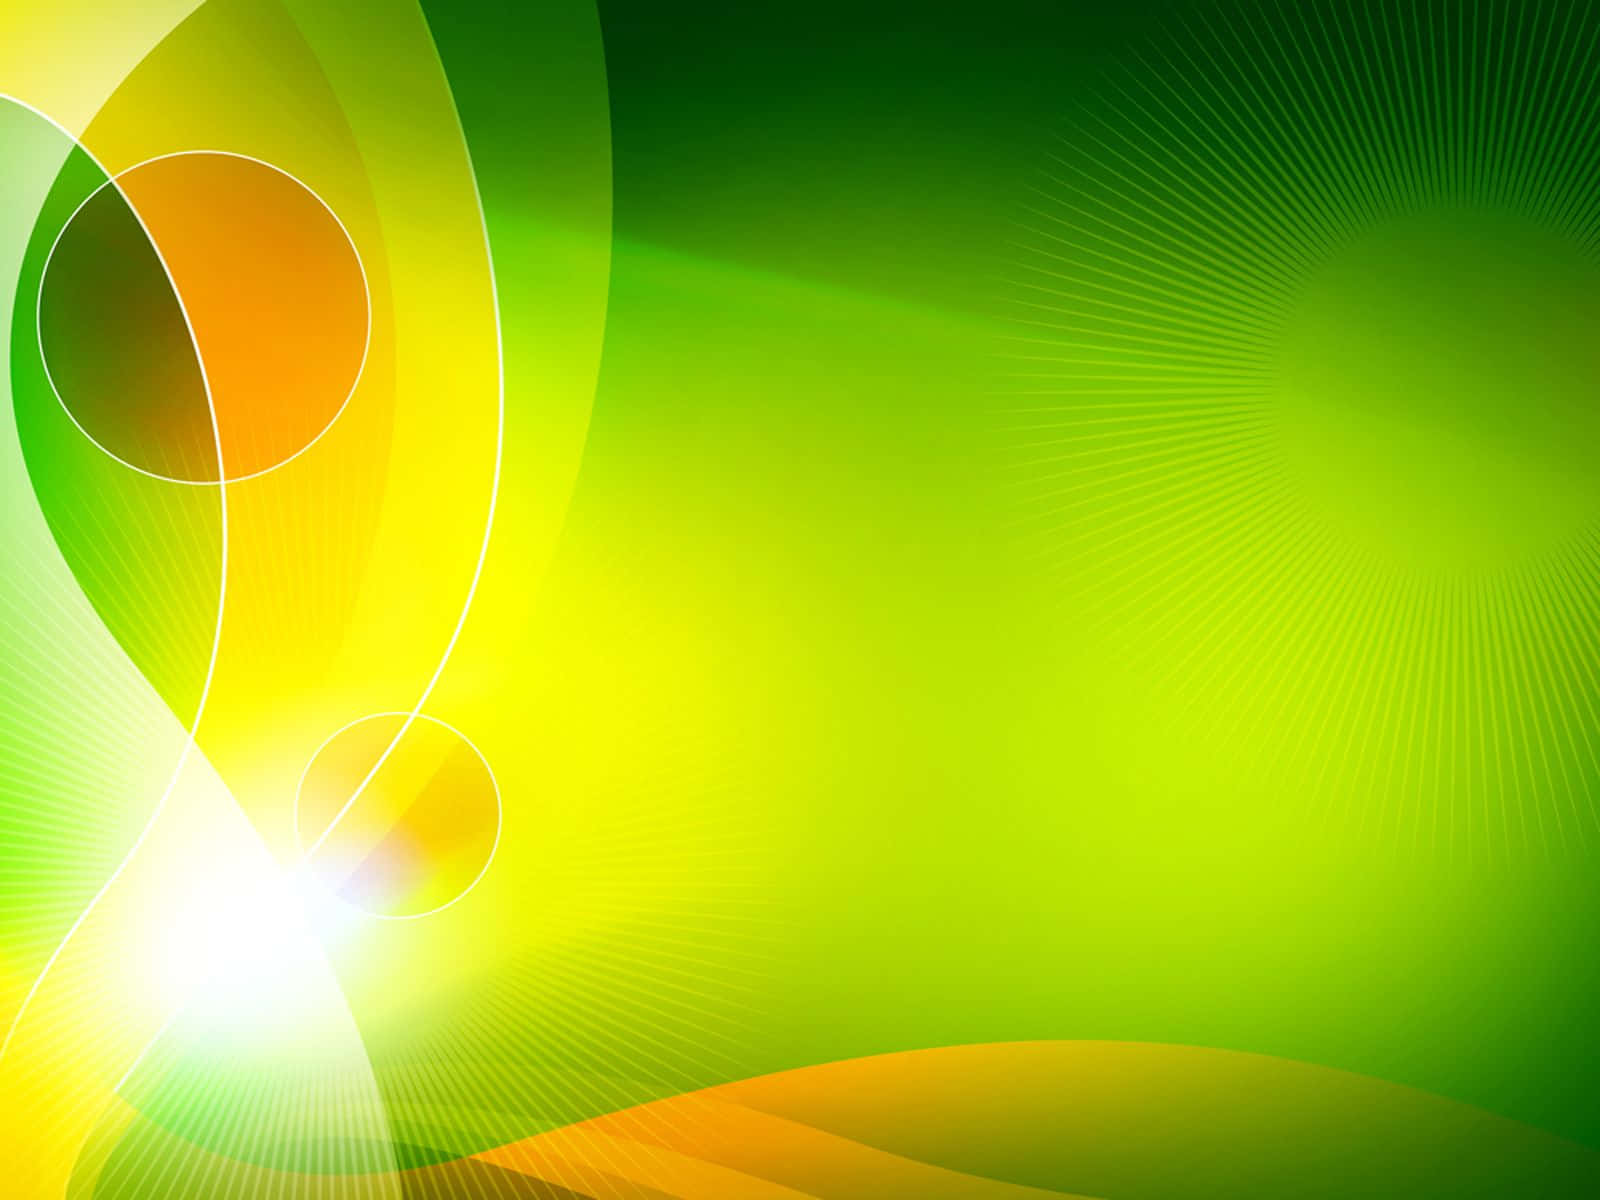 A Green And Yellow Abstract Background With A Light Shining On It